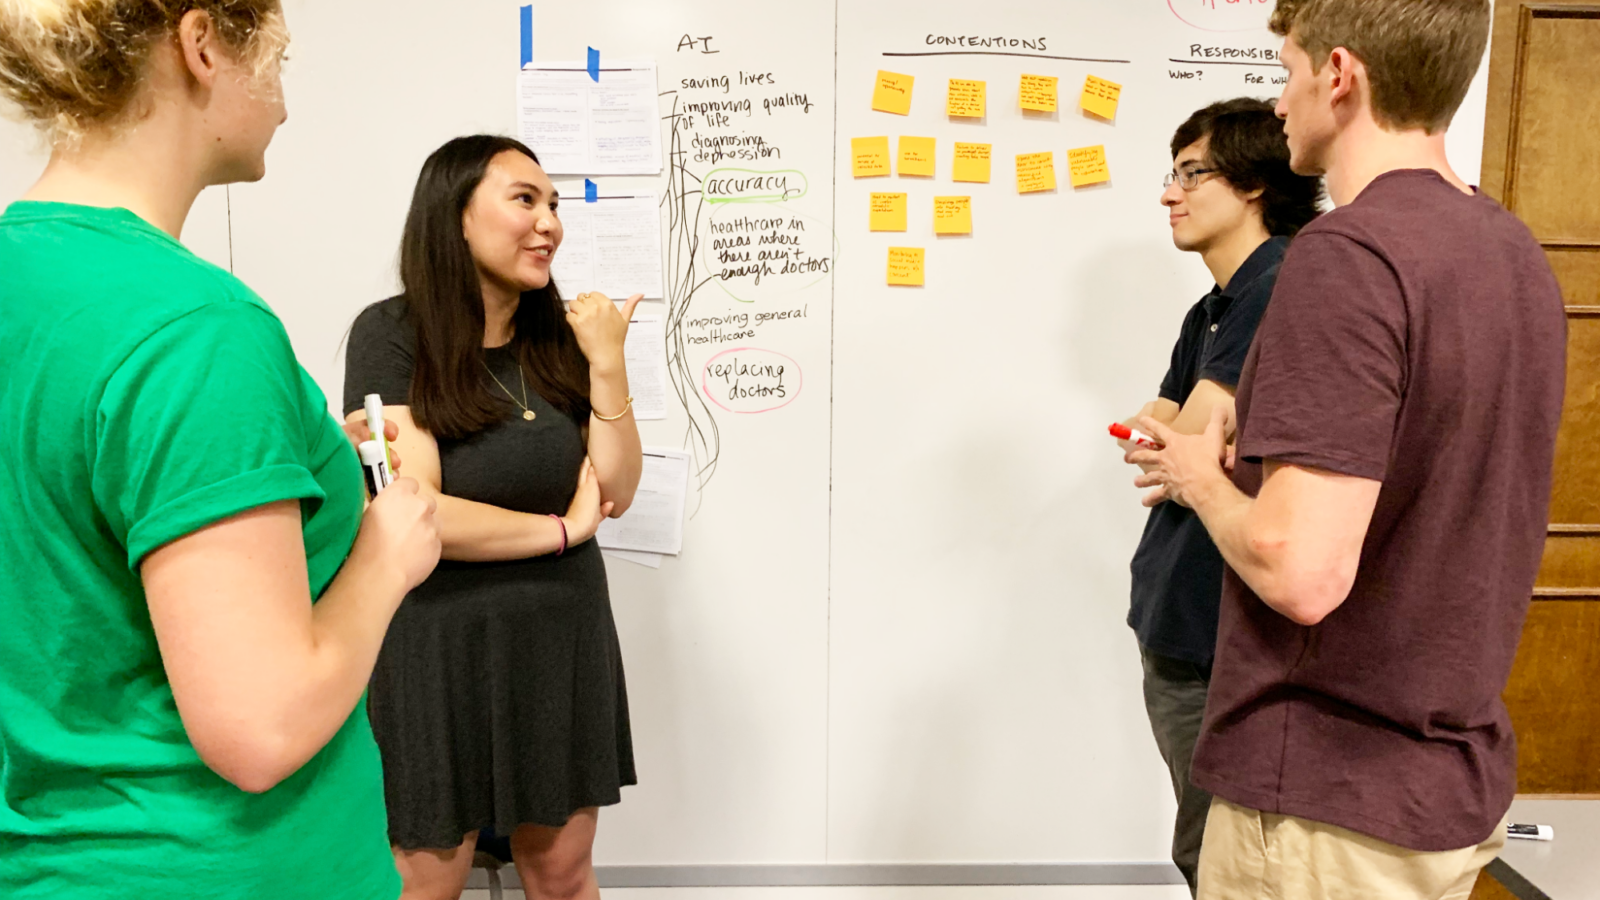 Students in the Fall 2019 Introduction to AI course use a white board and sticky notes in an interactive exercise.